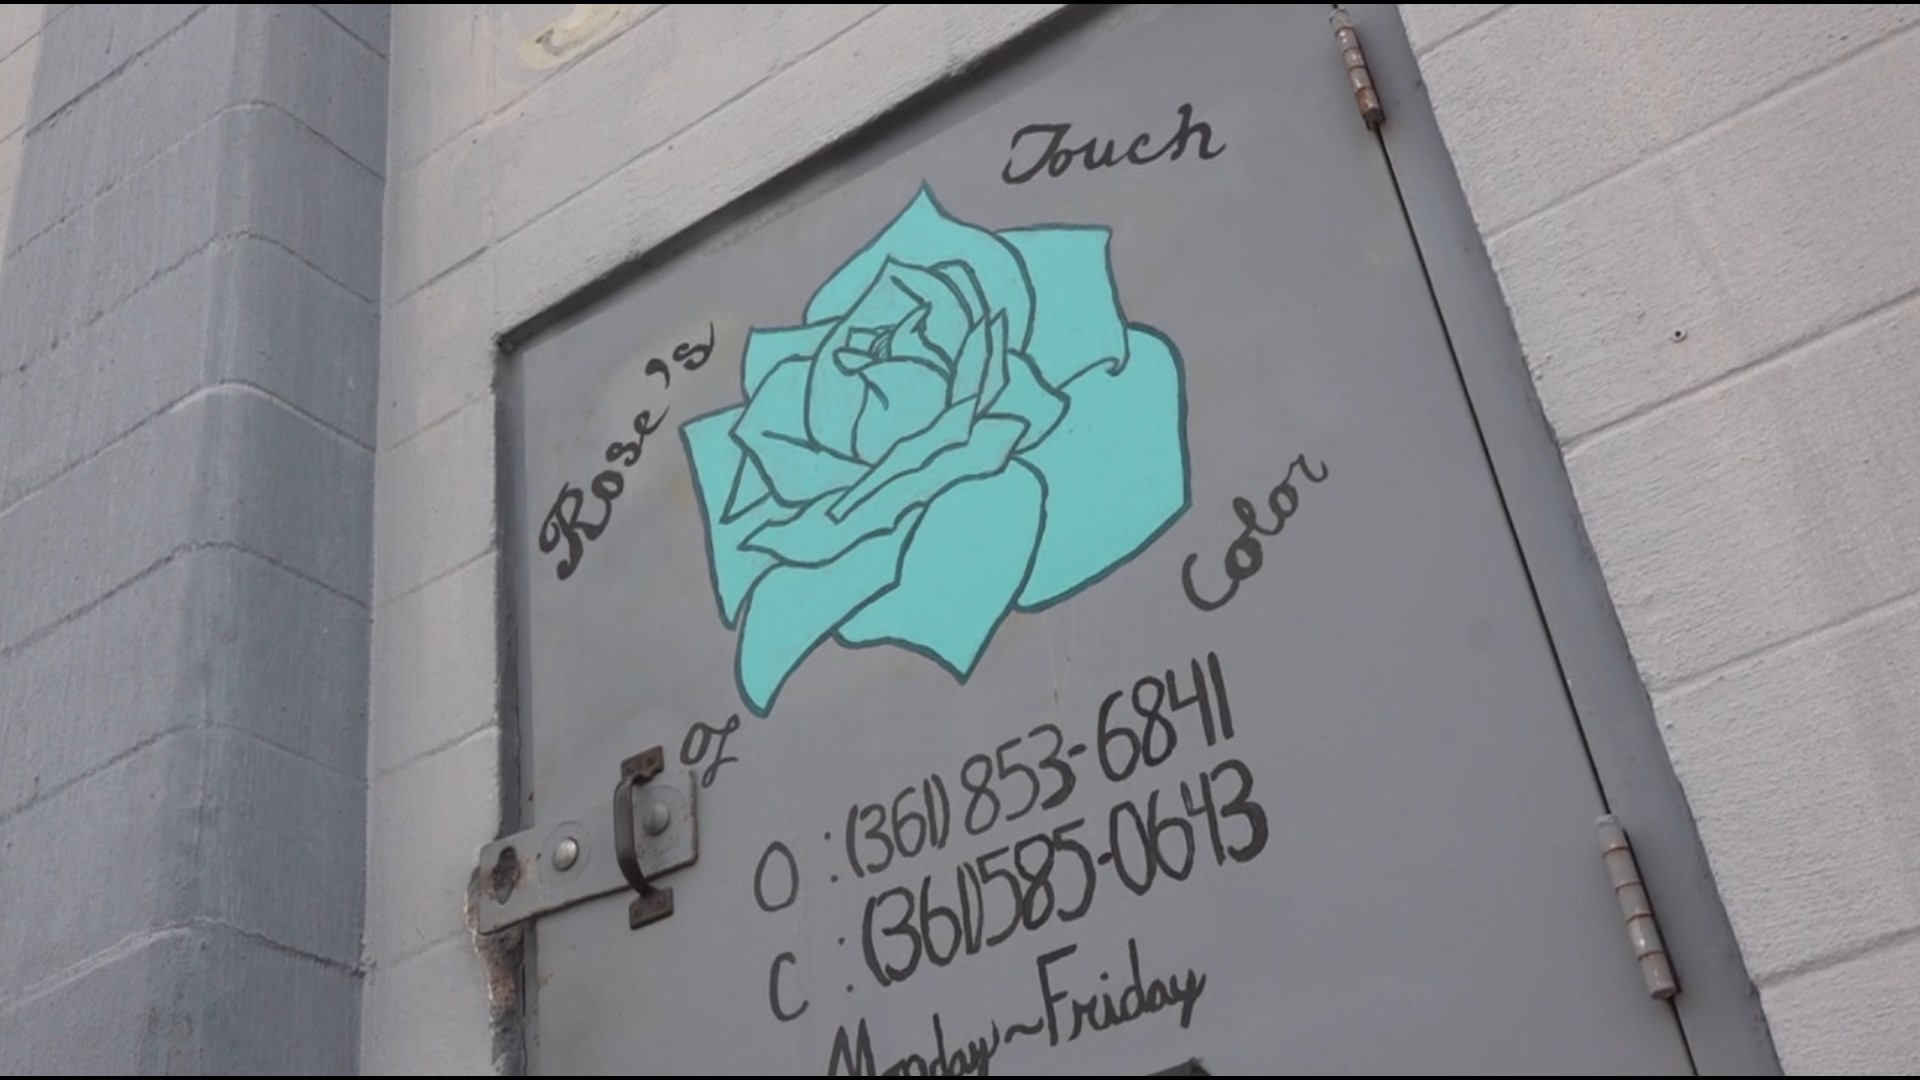 An all women's paint and auto body shop in Corpus Christi called Rose's Touch of Color is helping shake things up in the otherwise male dominated profession.